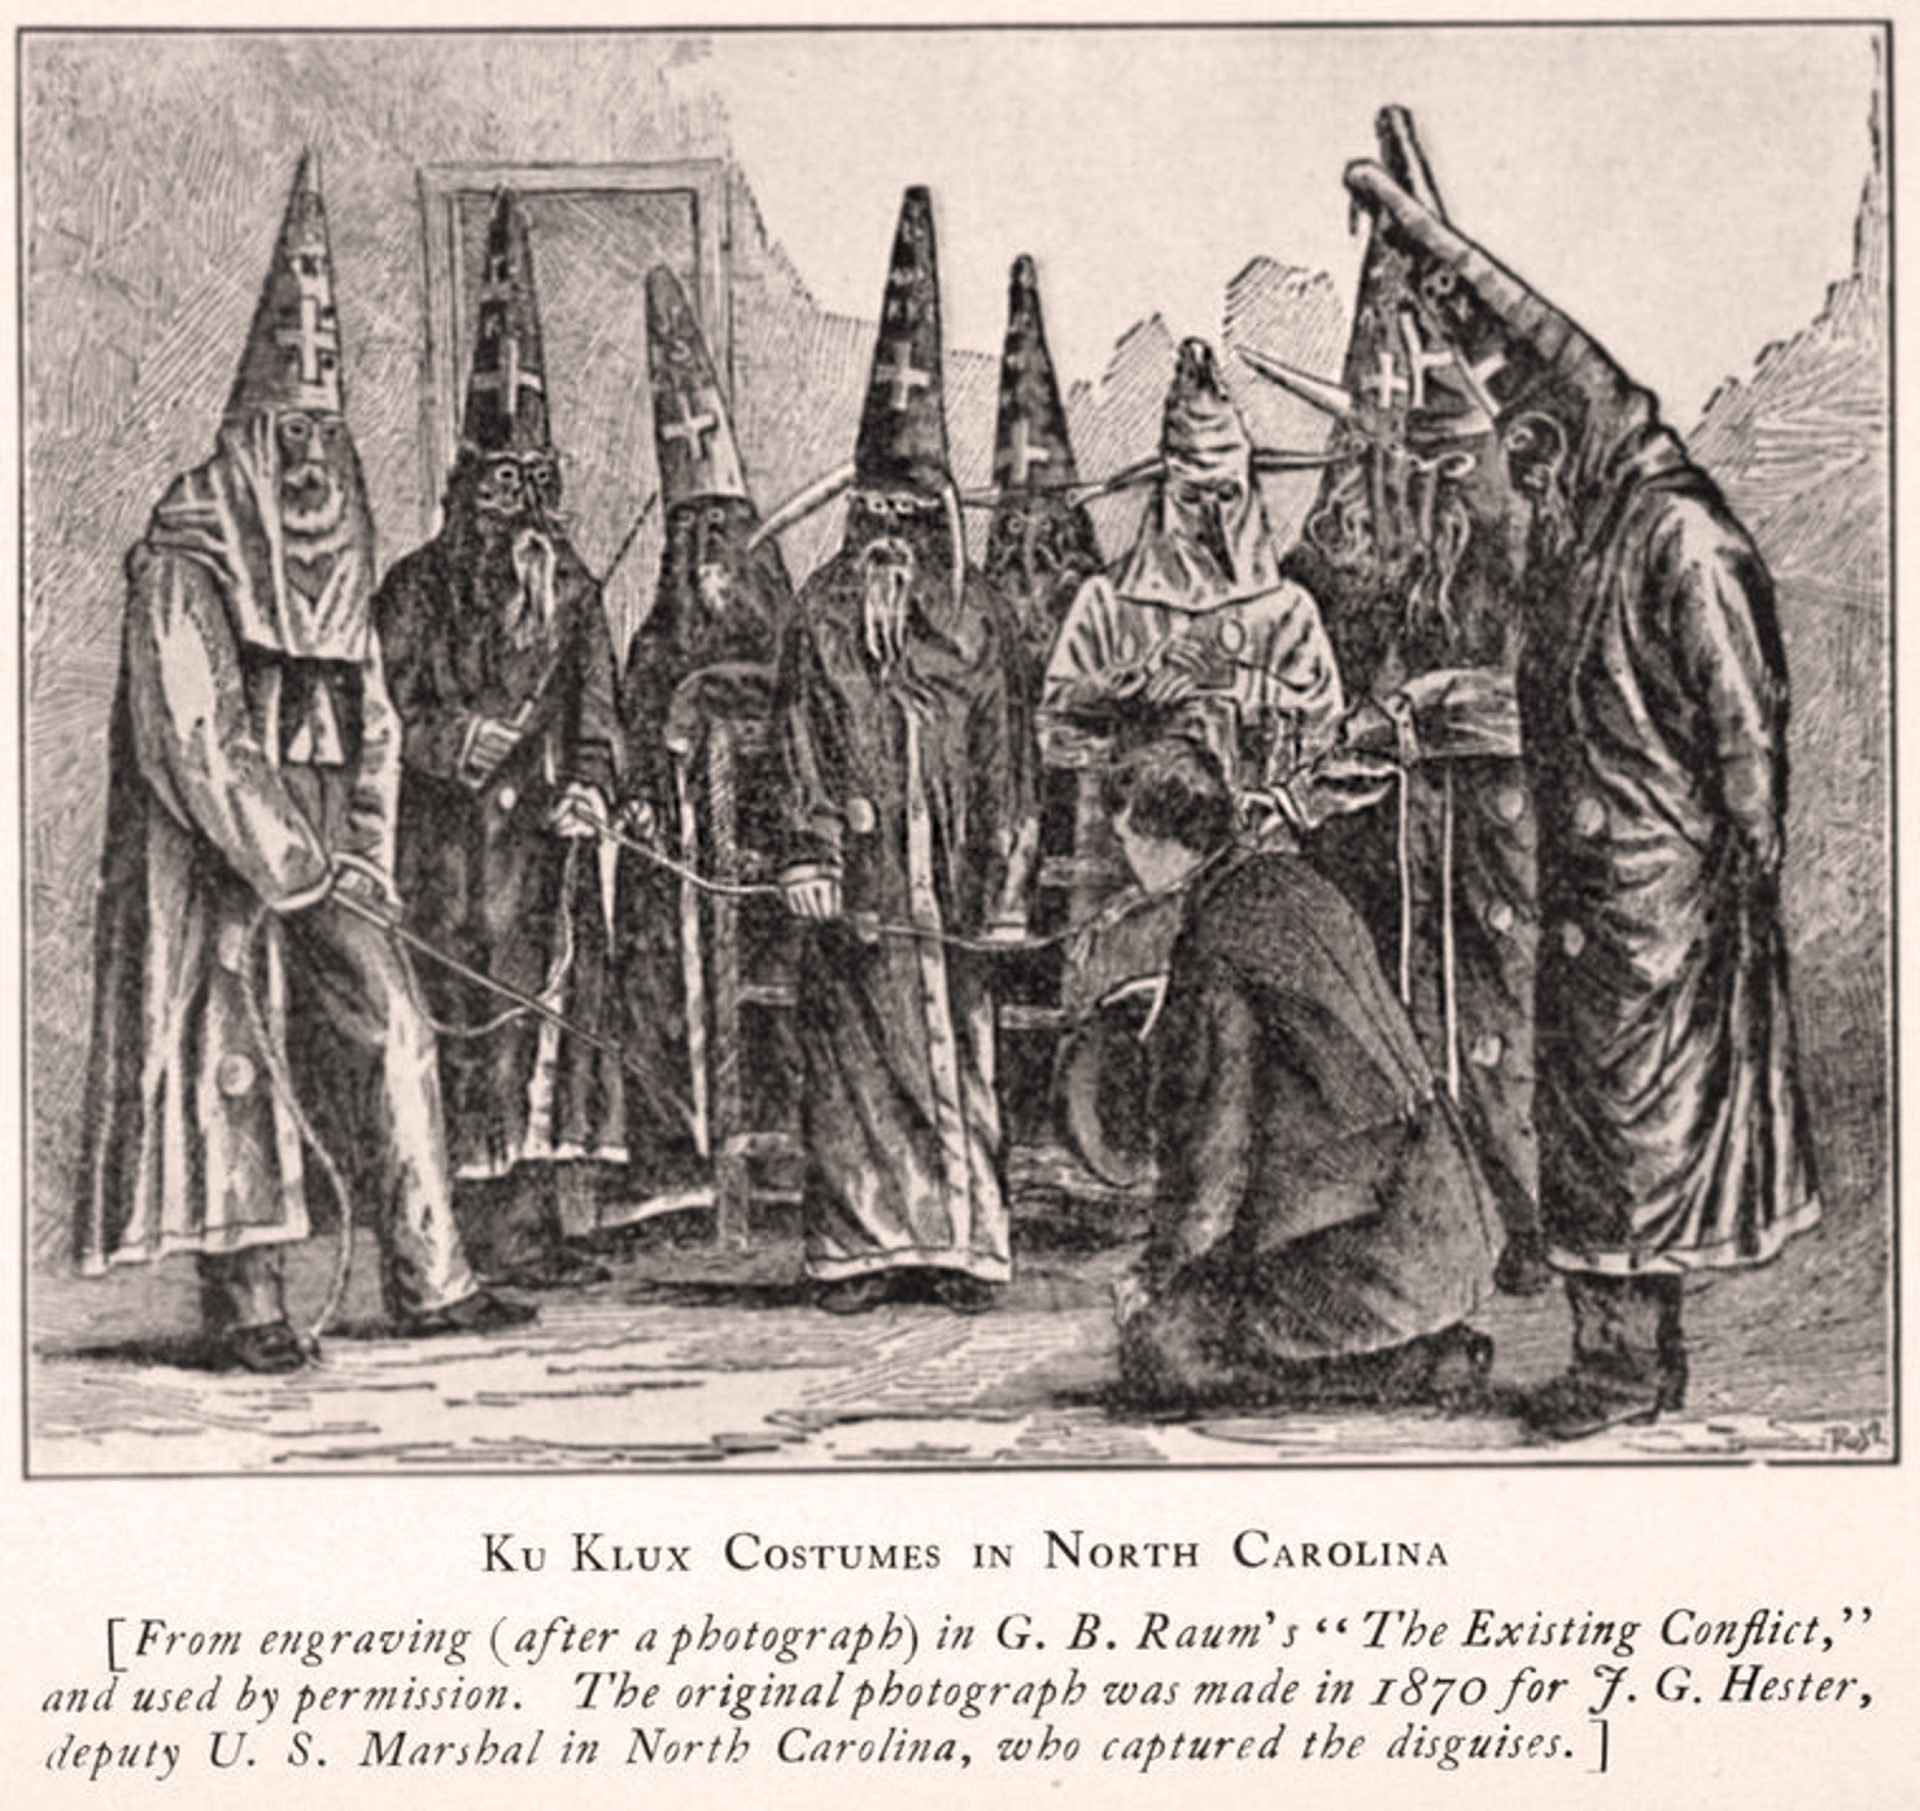 A group of people in Ku Klux Klan costumes in North Carolina, 1870. The costumes are long robes and pointed hats with eye holes. The image is an engraving based on a photograph.